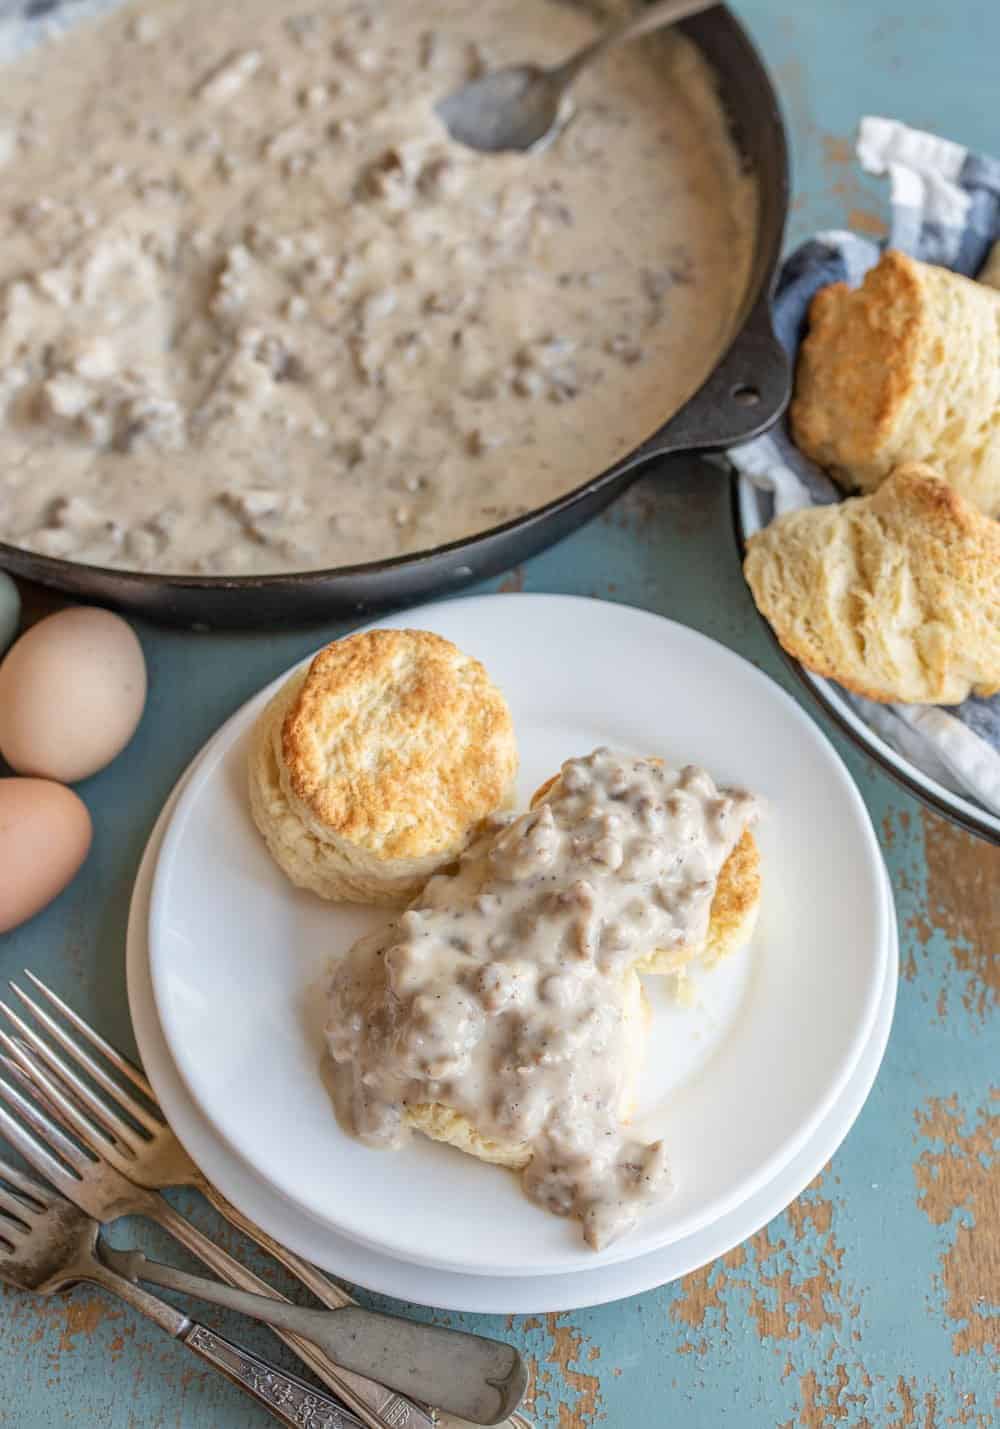 How to make homemade biscuits and gravy with just a few simple ingredients. I've been making this easy recipe for 20 years! It's the perfect comfort food. #biscuitsandgravy #gravy #biscuits #breakfast #comfortfood